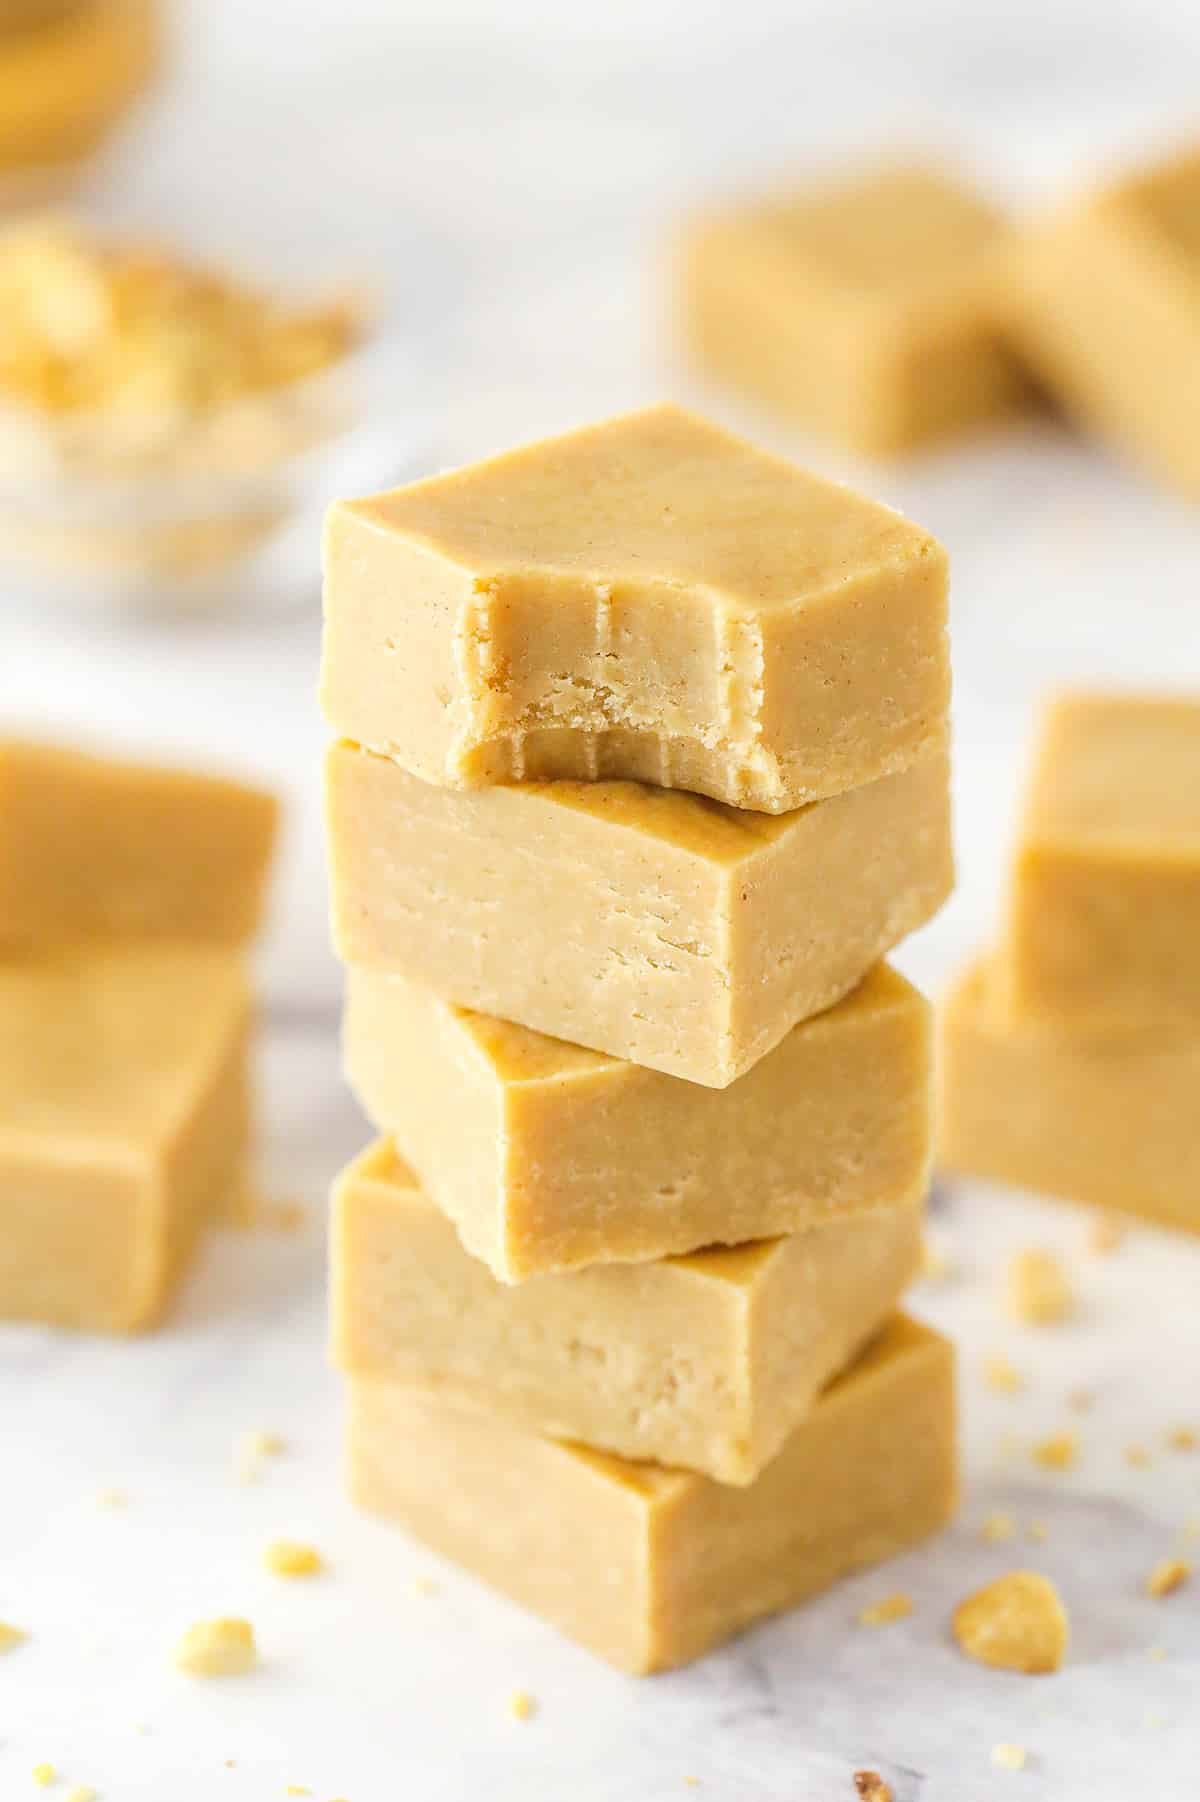 3 Ingredients Peanut Butter Fudge - Rich, Creamy, and Full of Flavor